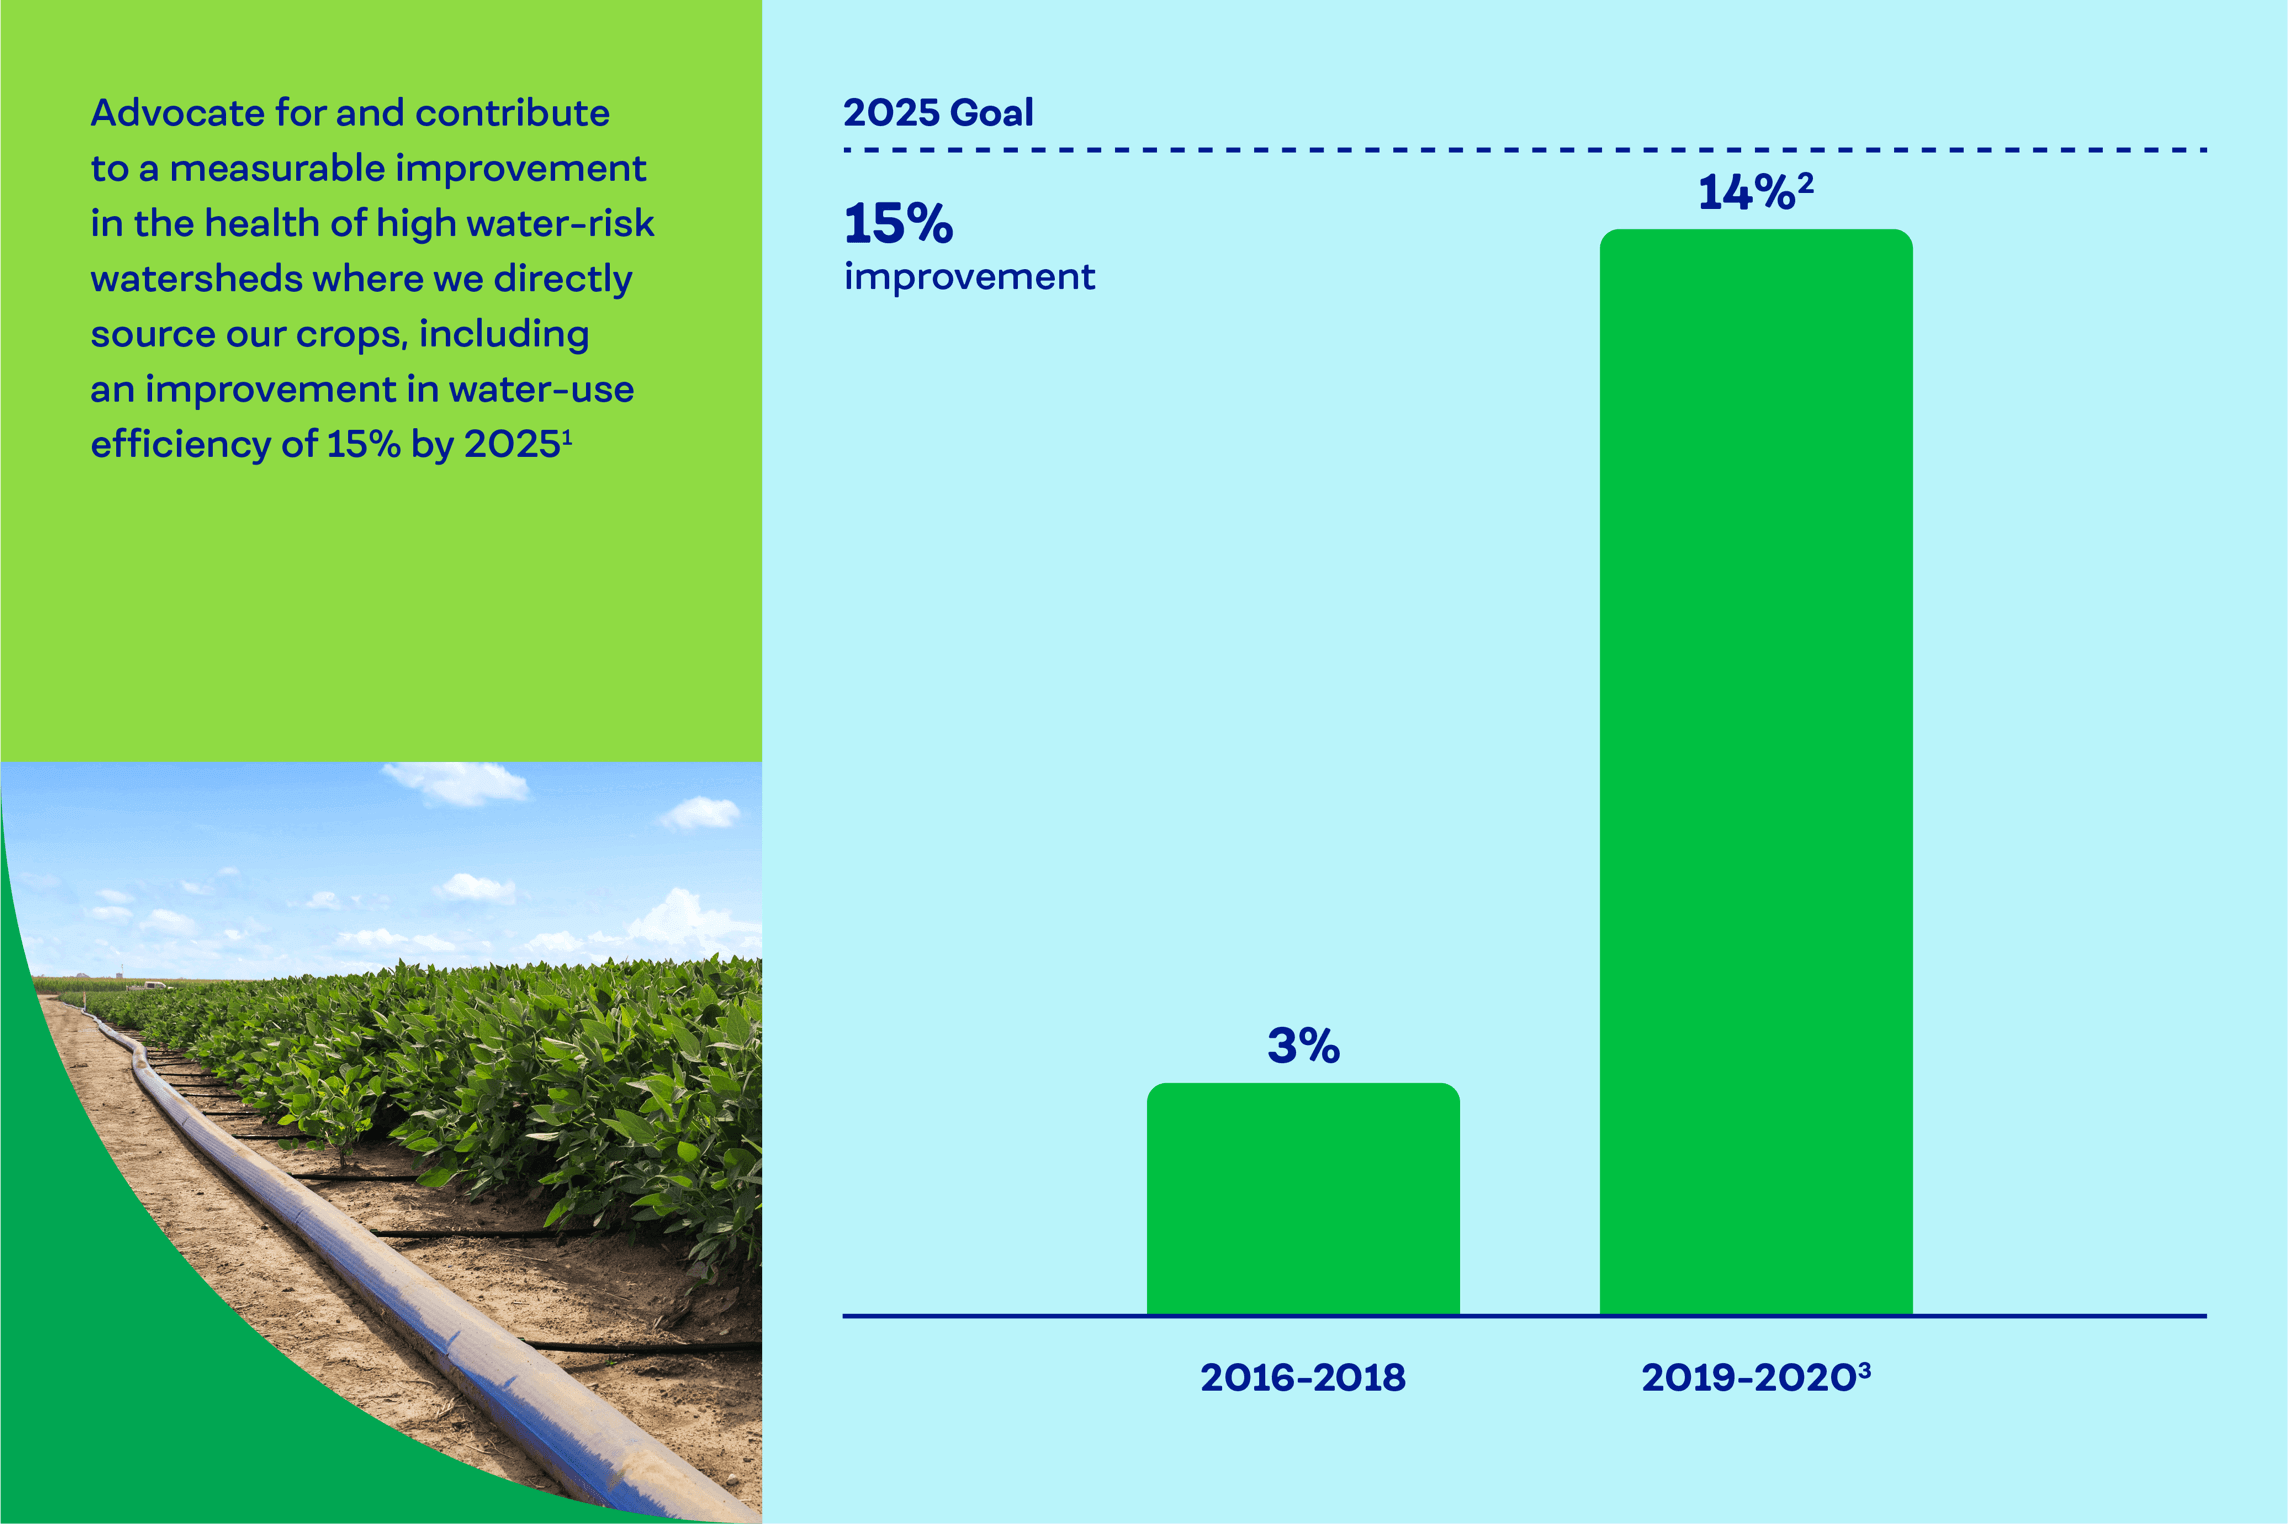 Advocate for and contribute to a measurable improvement in the health of high water-risk watersheds where we directly source our crops, including an improvement in water-use efficiency of 15% by 2025.